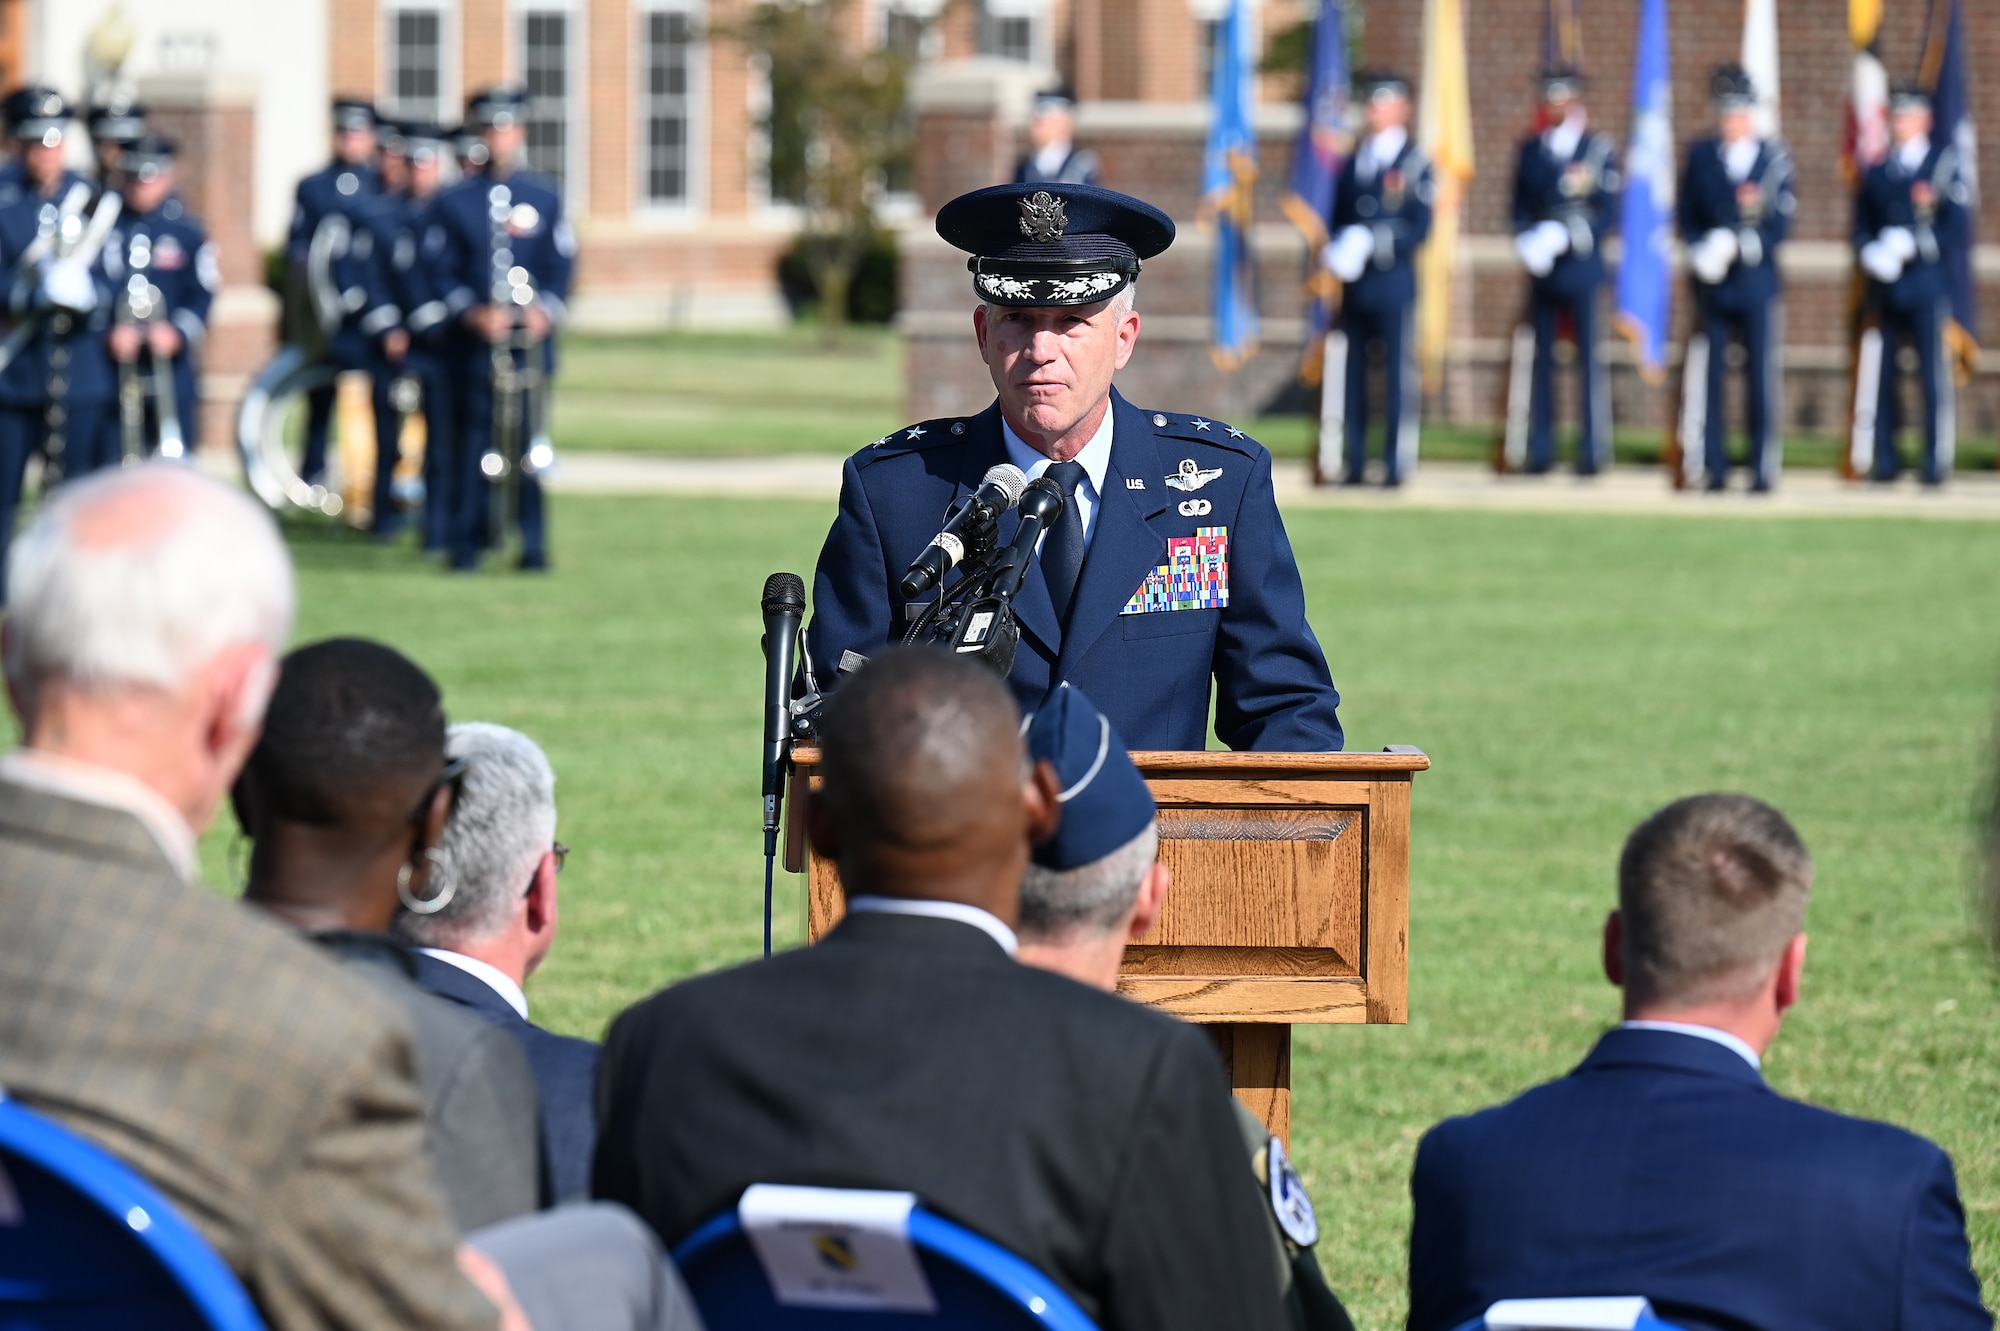 U.S. Air Force Maj. Gen. Joel D. Jackson, Air Force District of Washington and the 320th Air Expeditionary Wing commander, addresses an audience during a change of command ceremony on Joint Base Anacostia-Bolling, Washington, D.C., Sept. 28, 2021. Jackson presided over the ceremony during which Col. Mike Zuhlsdorf relinquished command of JBAB and the 11th Wing to Col. Cat Logan. Zuhlsdorf commanded JBAB and the 11th Wing during the Department of Defense’s first-ever joint base lead service transfer in 2020, during which the Air Force took control of the installation from the Navy. (U.S. Air Force photo by Staff Sgt. Kayla White)